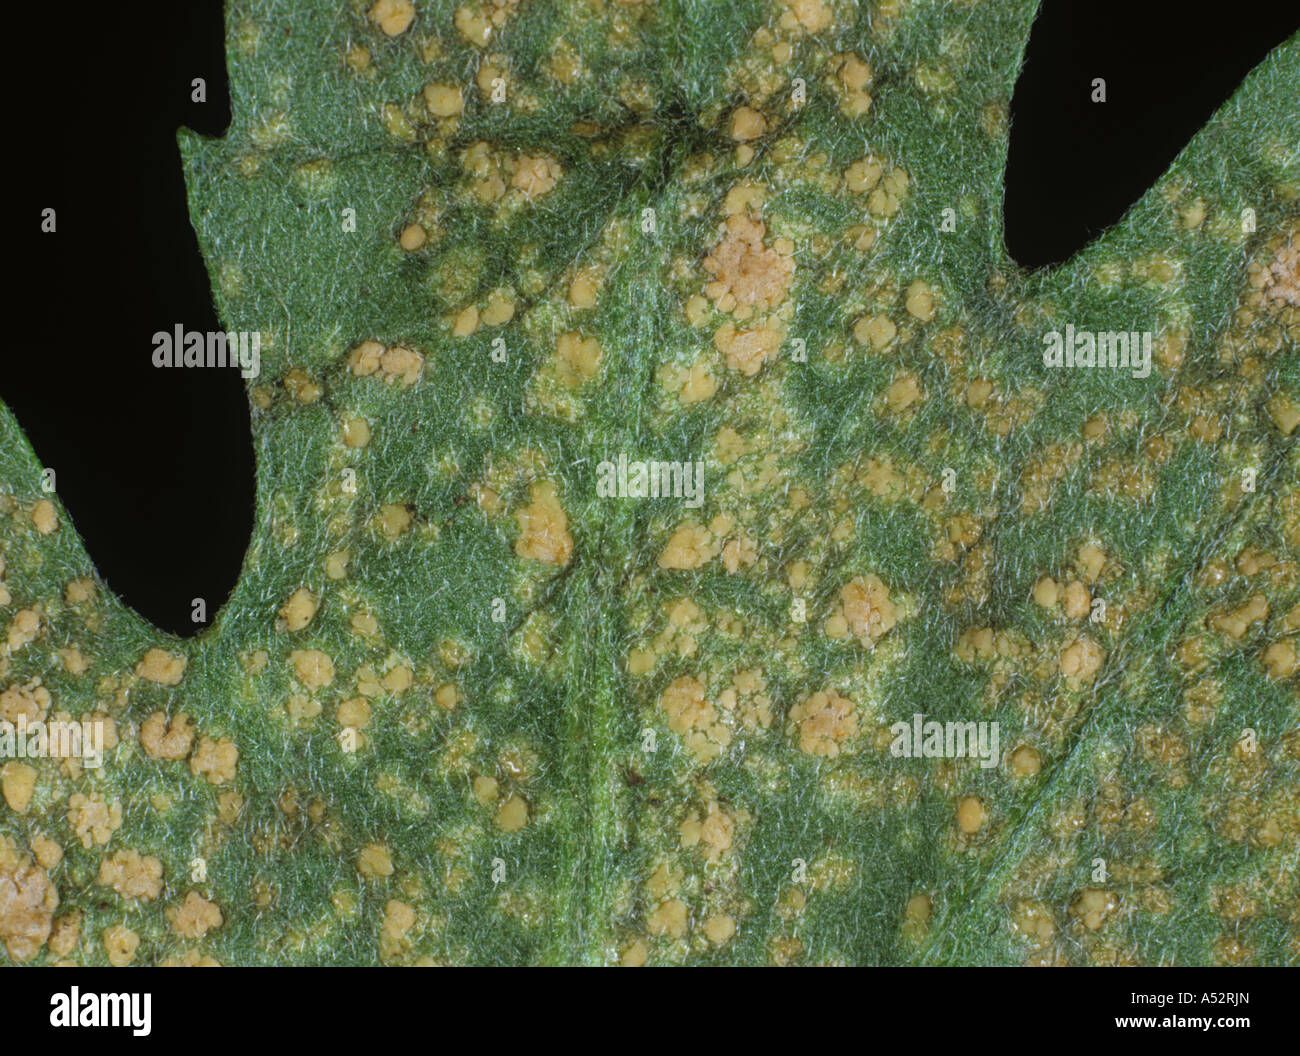 White rust Puccinia horiana on the underside of a Chrysanthemum leaf Stock Photo